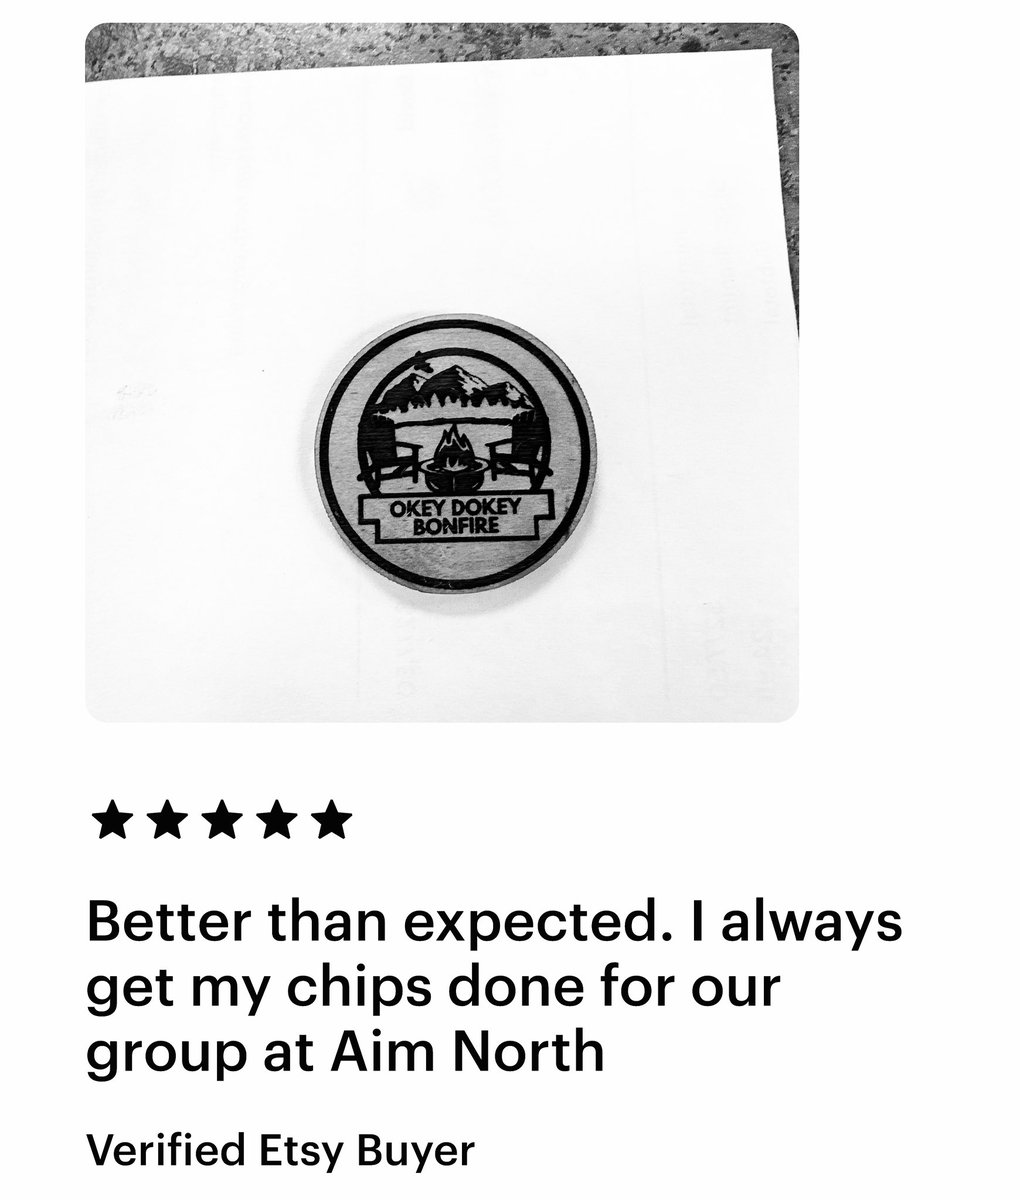 #AimNorthEngraving #PersonalizedSobrietyTokens #CustomSobrietyTokens #GroupTokens, #Personalizedgifts #PersonalizedGroupTokens #GroupChips #RecoveryTokens #SupportRecovery #RecoverySupport #Recovery #SobrietyChips #Sobrietygifts #Sober #SoberMode #SoberLife #SoberGifts